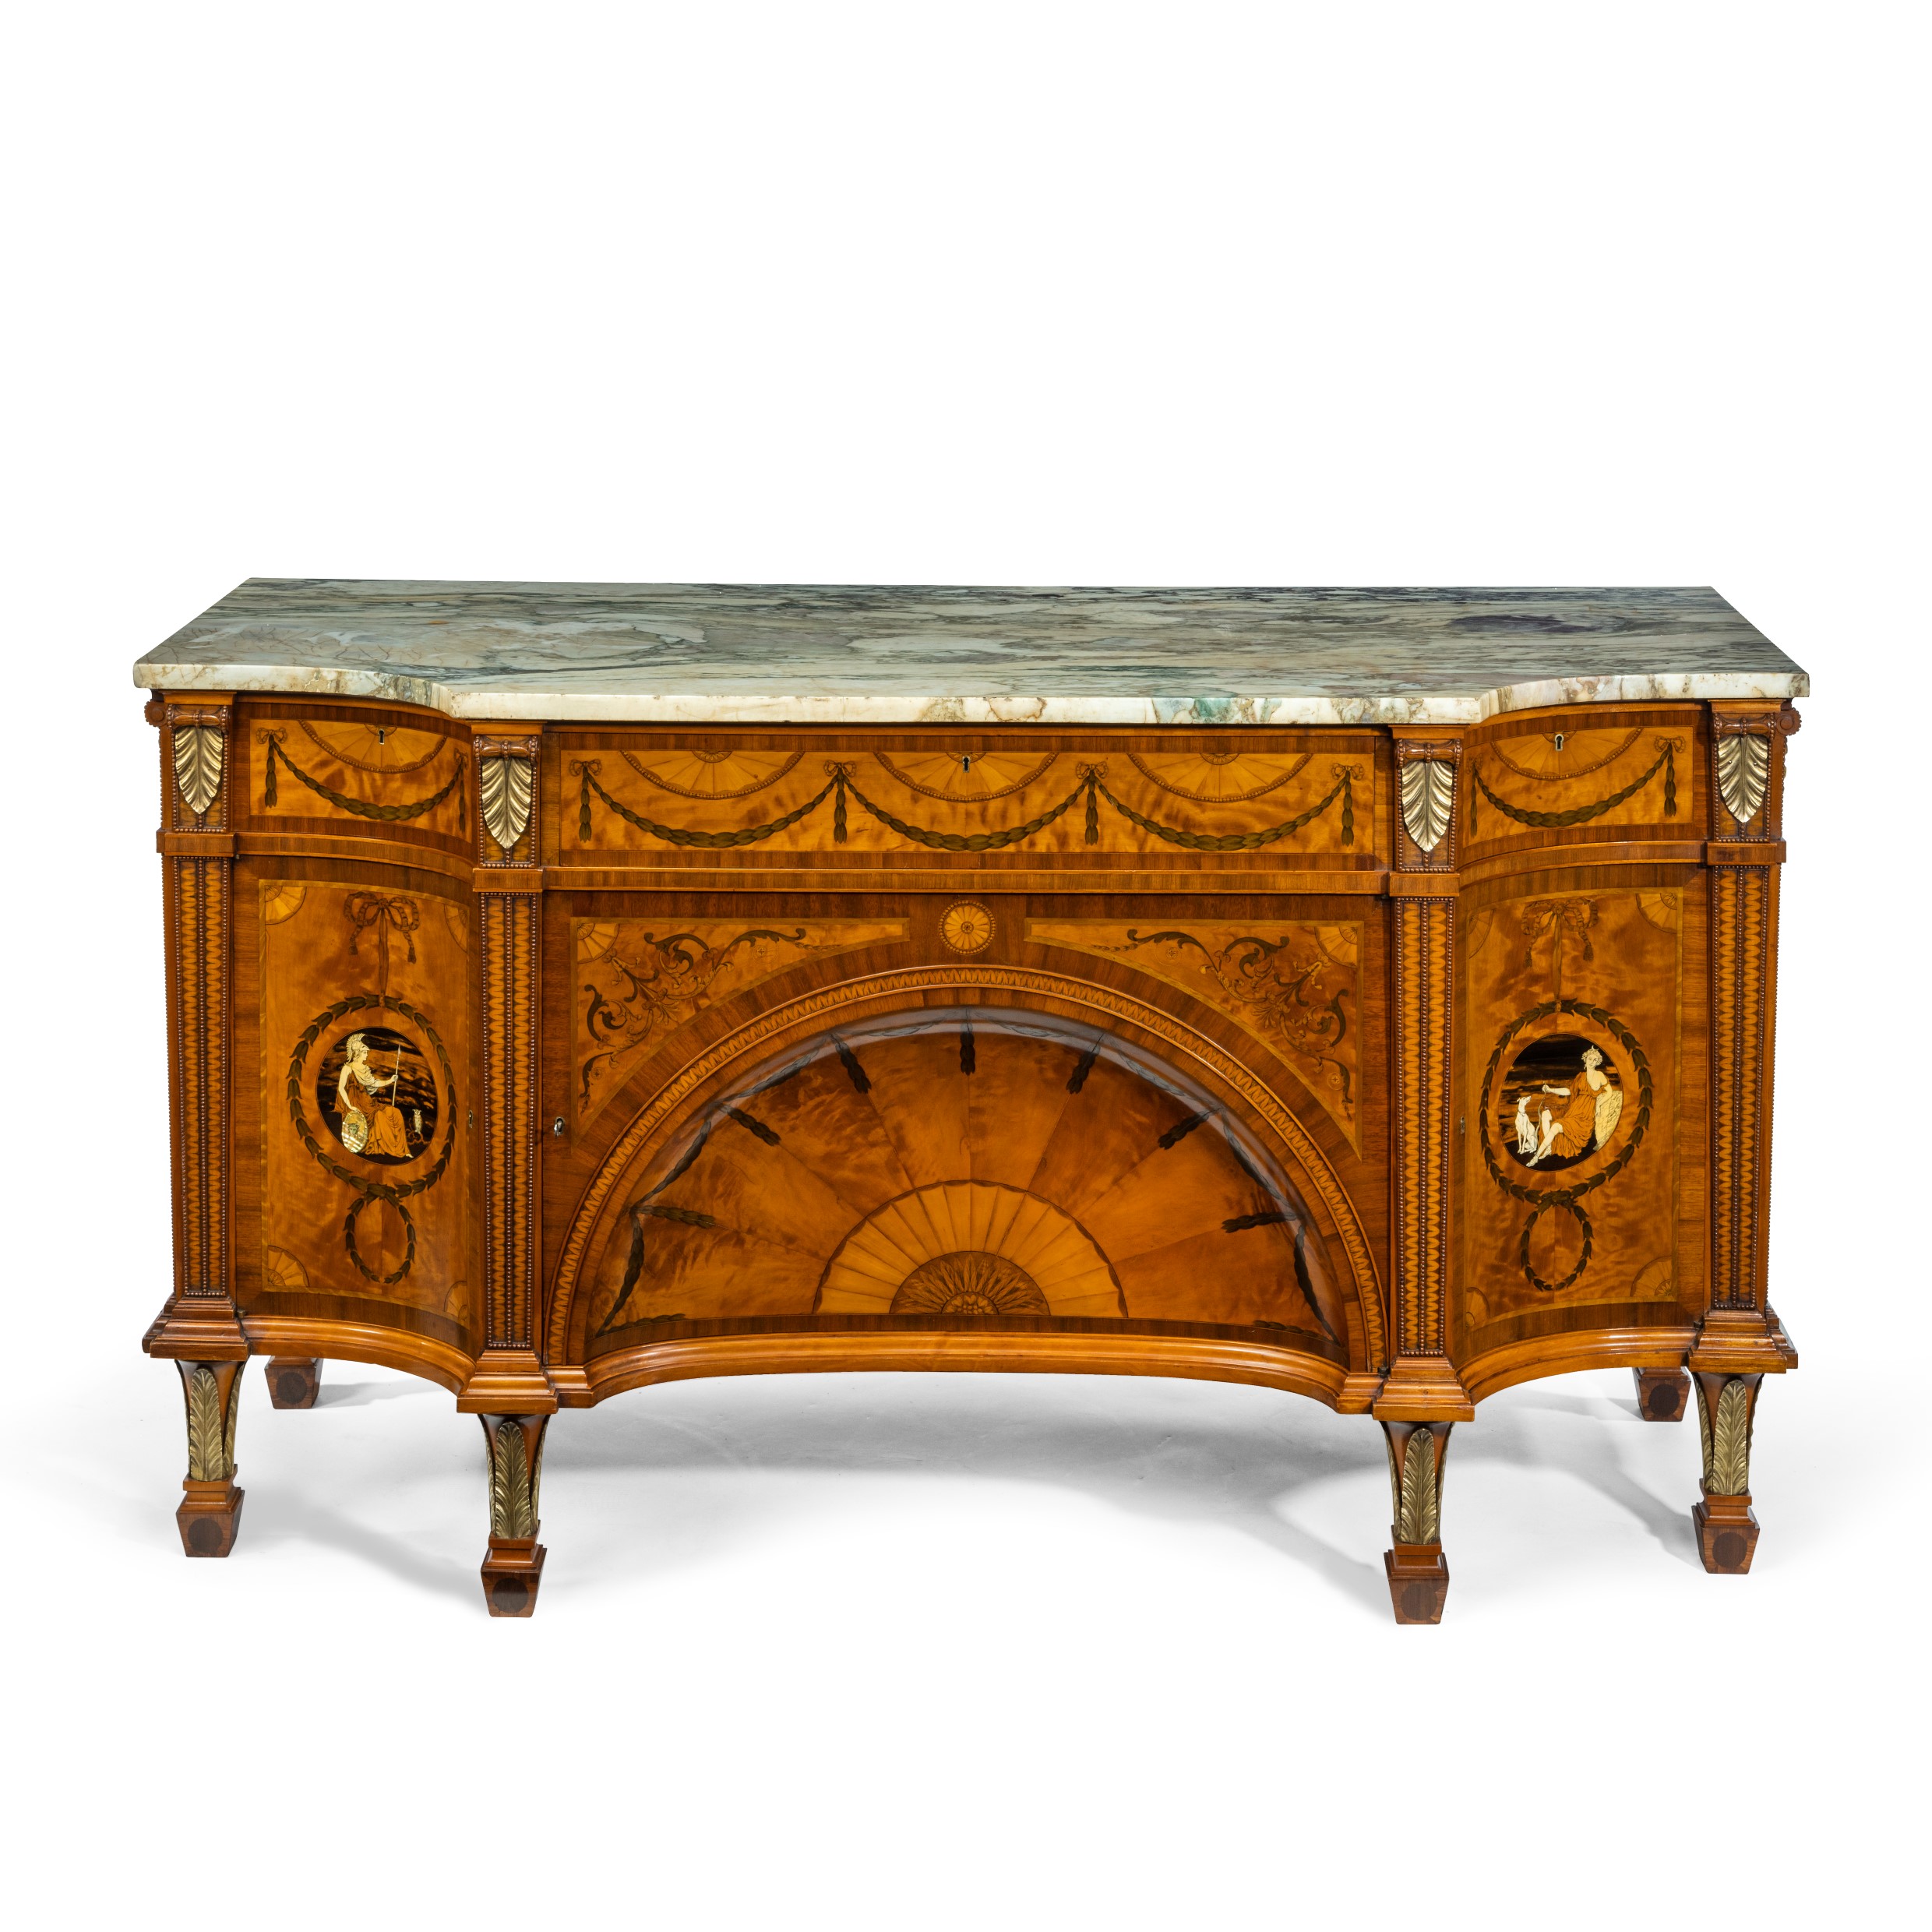 A satinwood Sheraton Revival breakfront marquetry commode